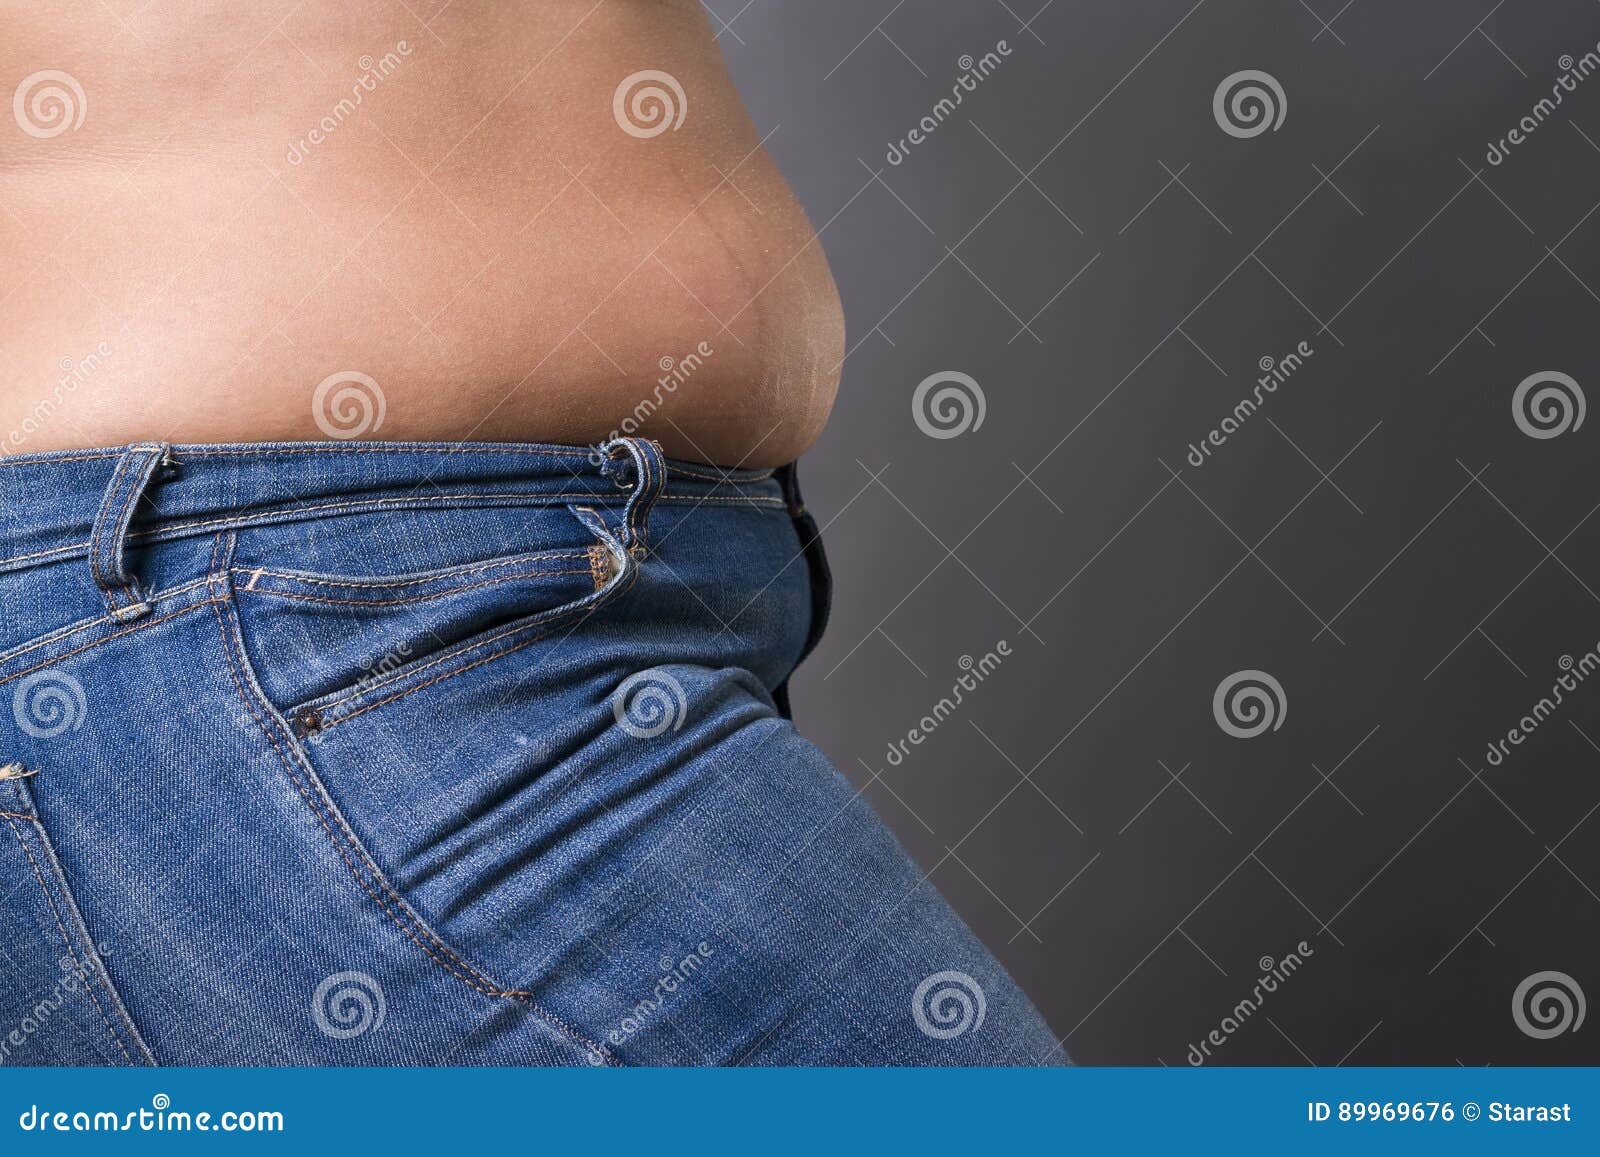 Woman With Fat Abdomen In Blue Jeans Overweight Female Stomach